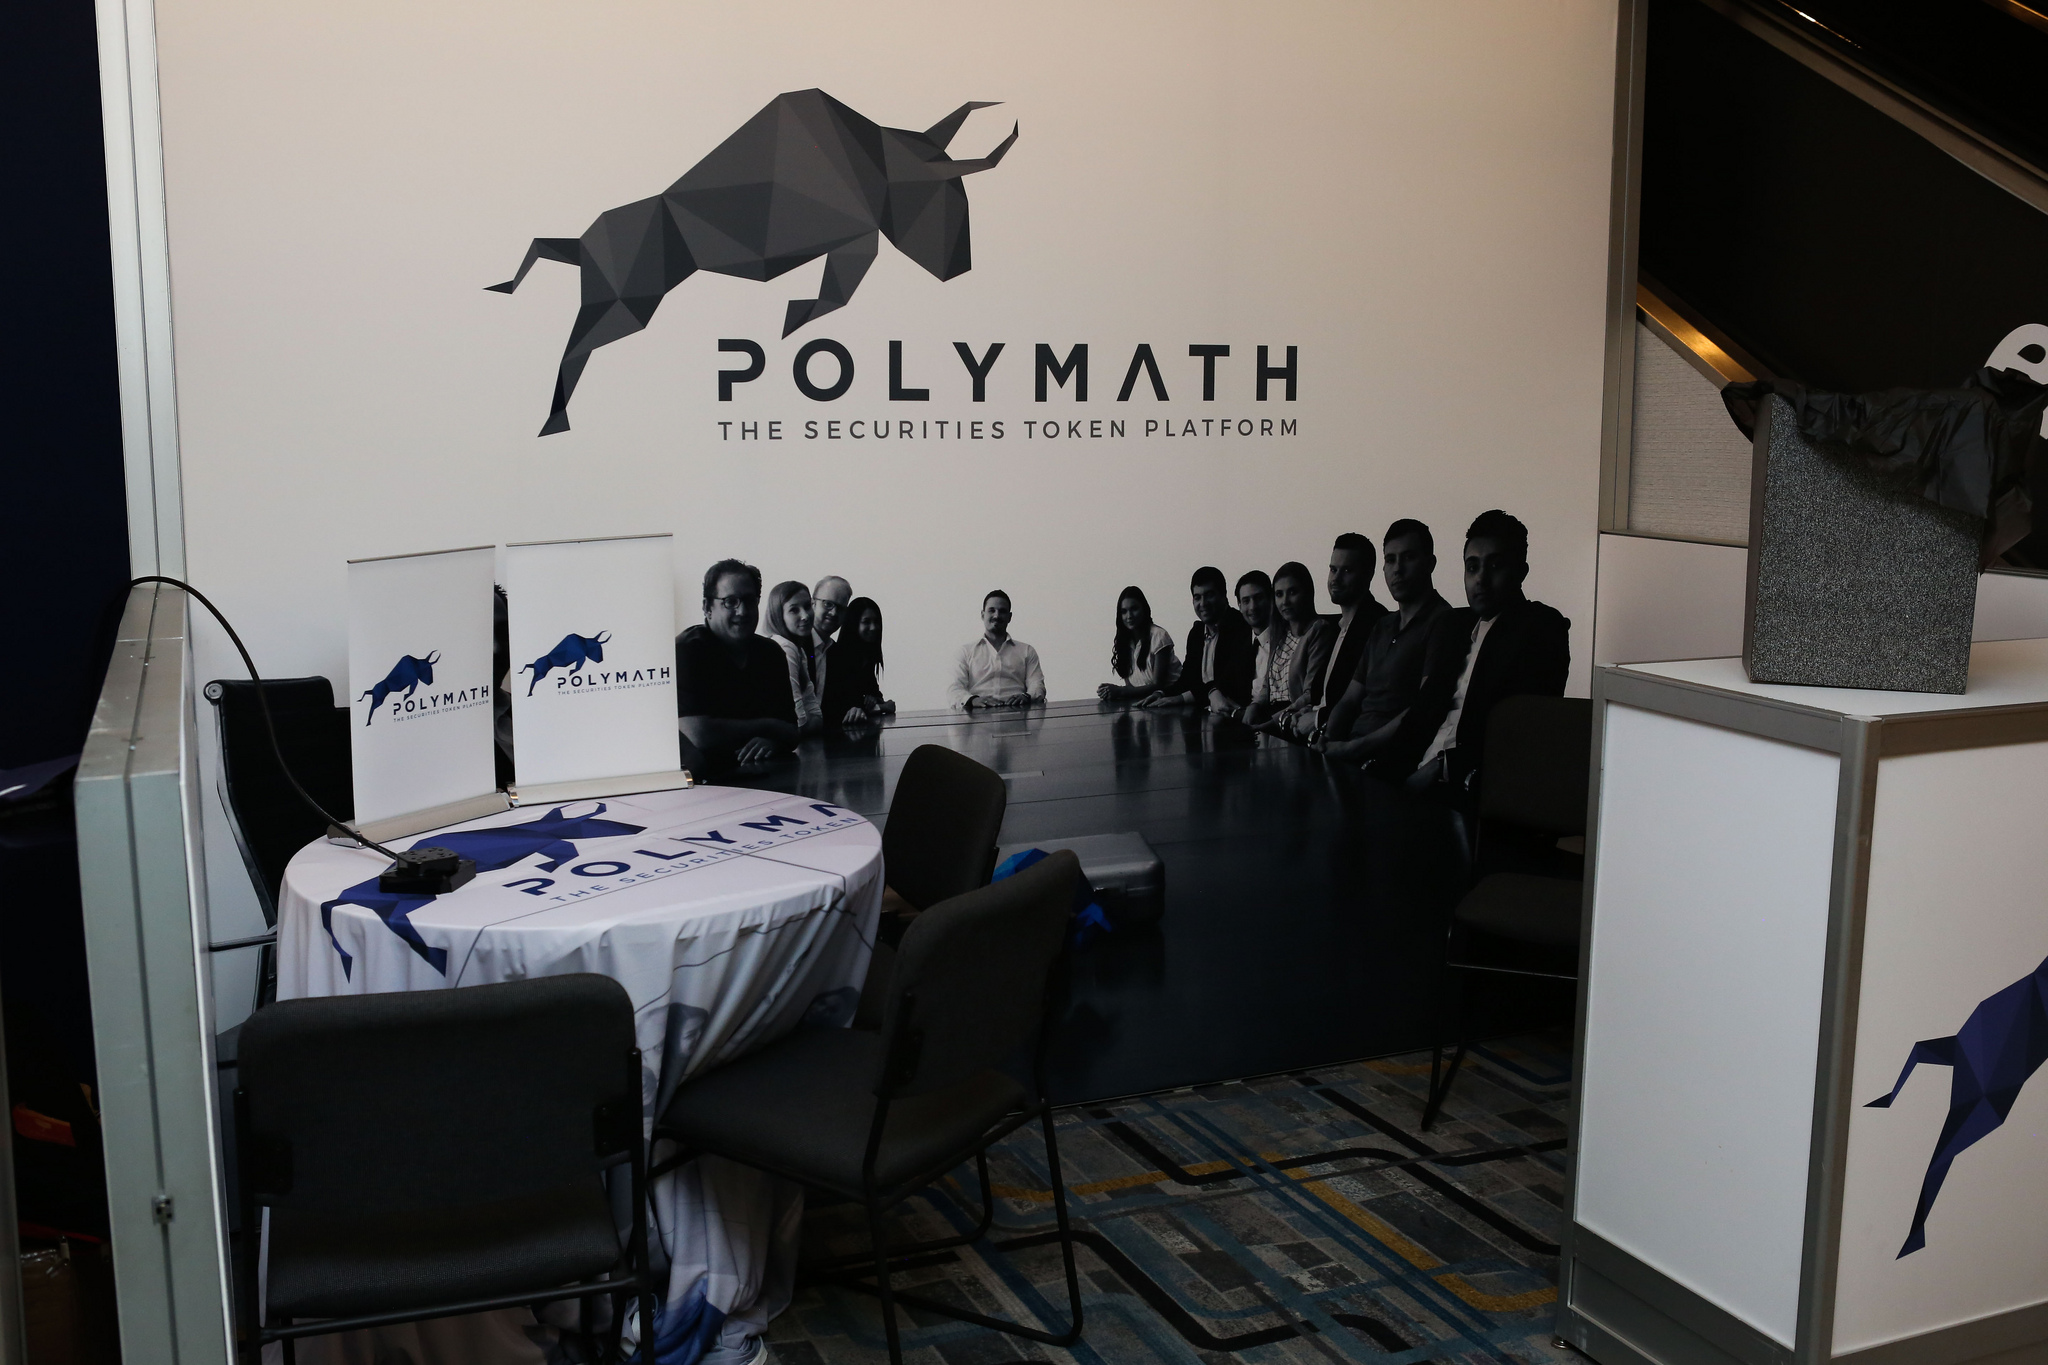 Polymath Tests Show Security Tokens Can Be Compliant On A DEX